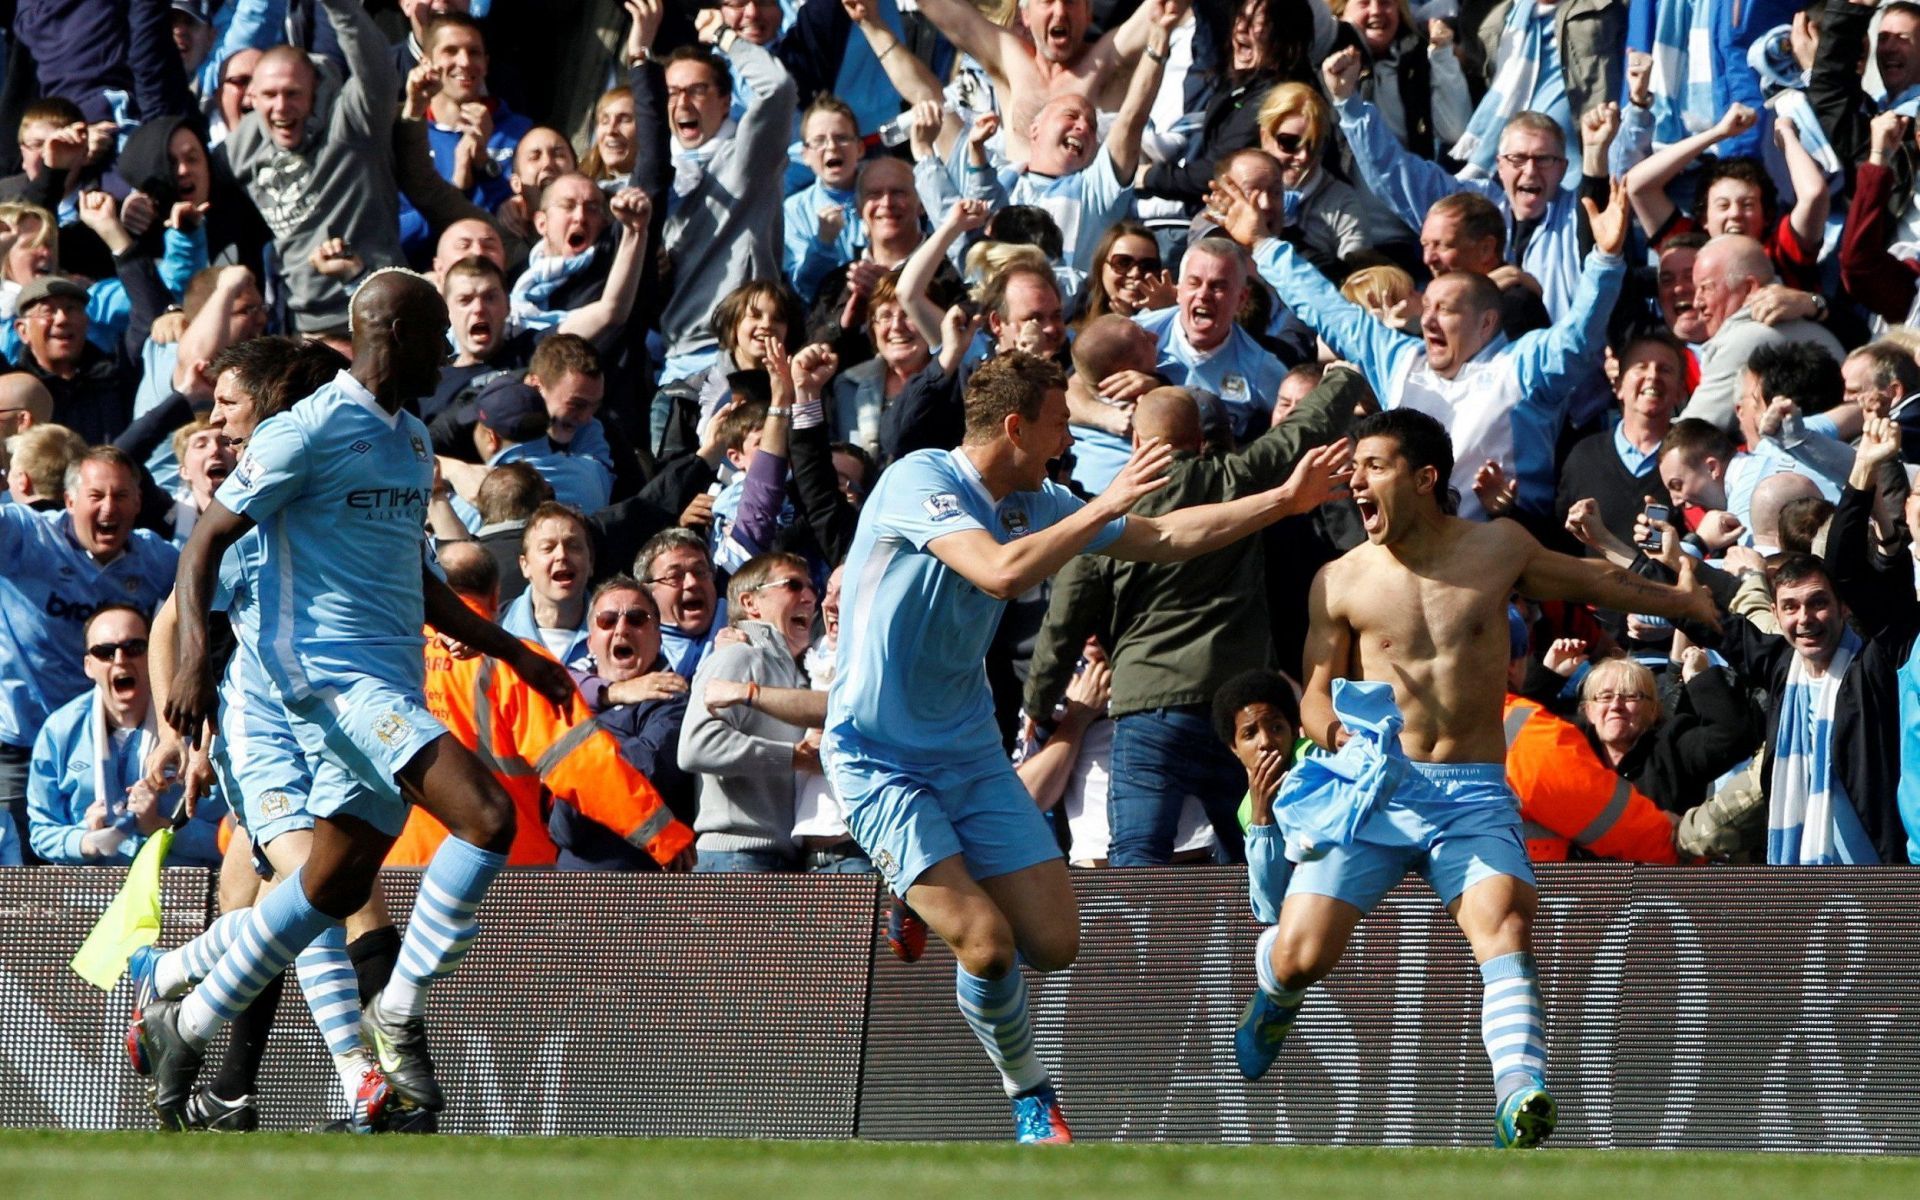 Sergio Aguero&#039;s last-minute winner against QPR during the 2011/12 Premier League season is one of the greatest sporting moments